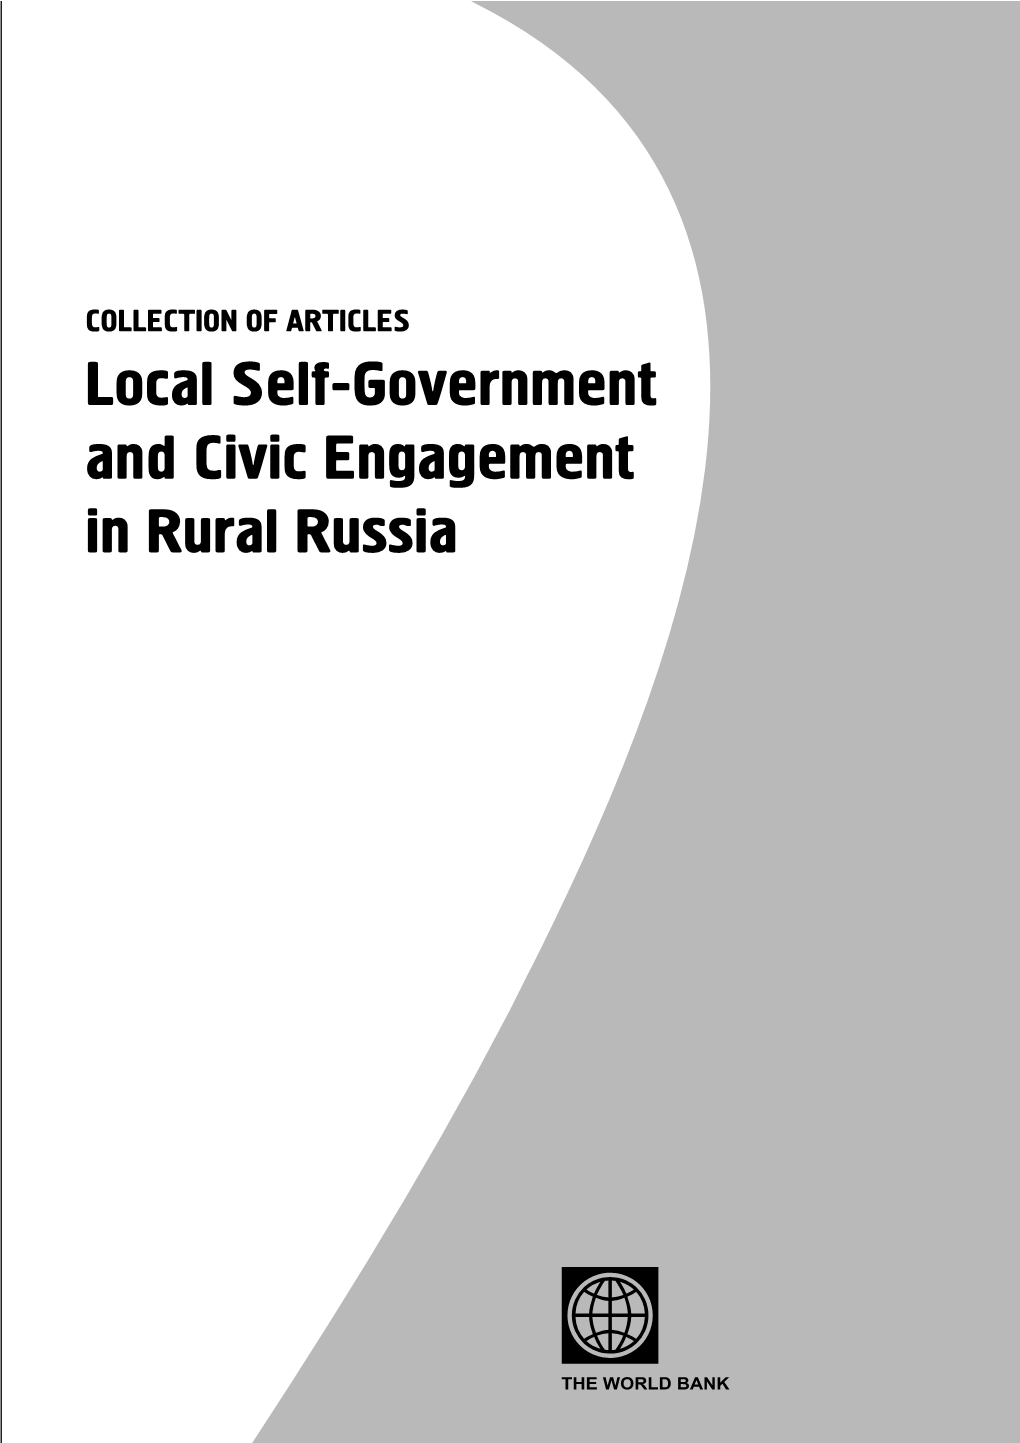 Local Self-Government and Civic Engagement in Rural Russia